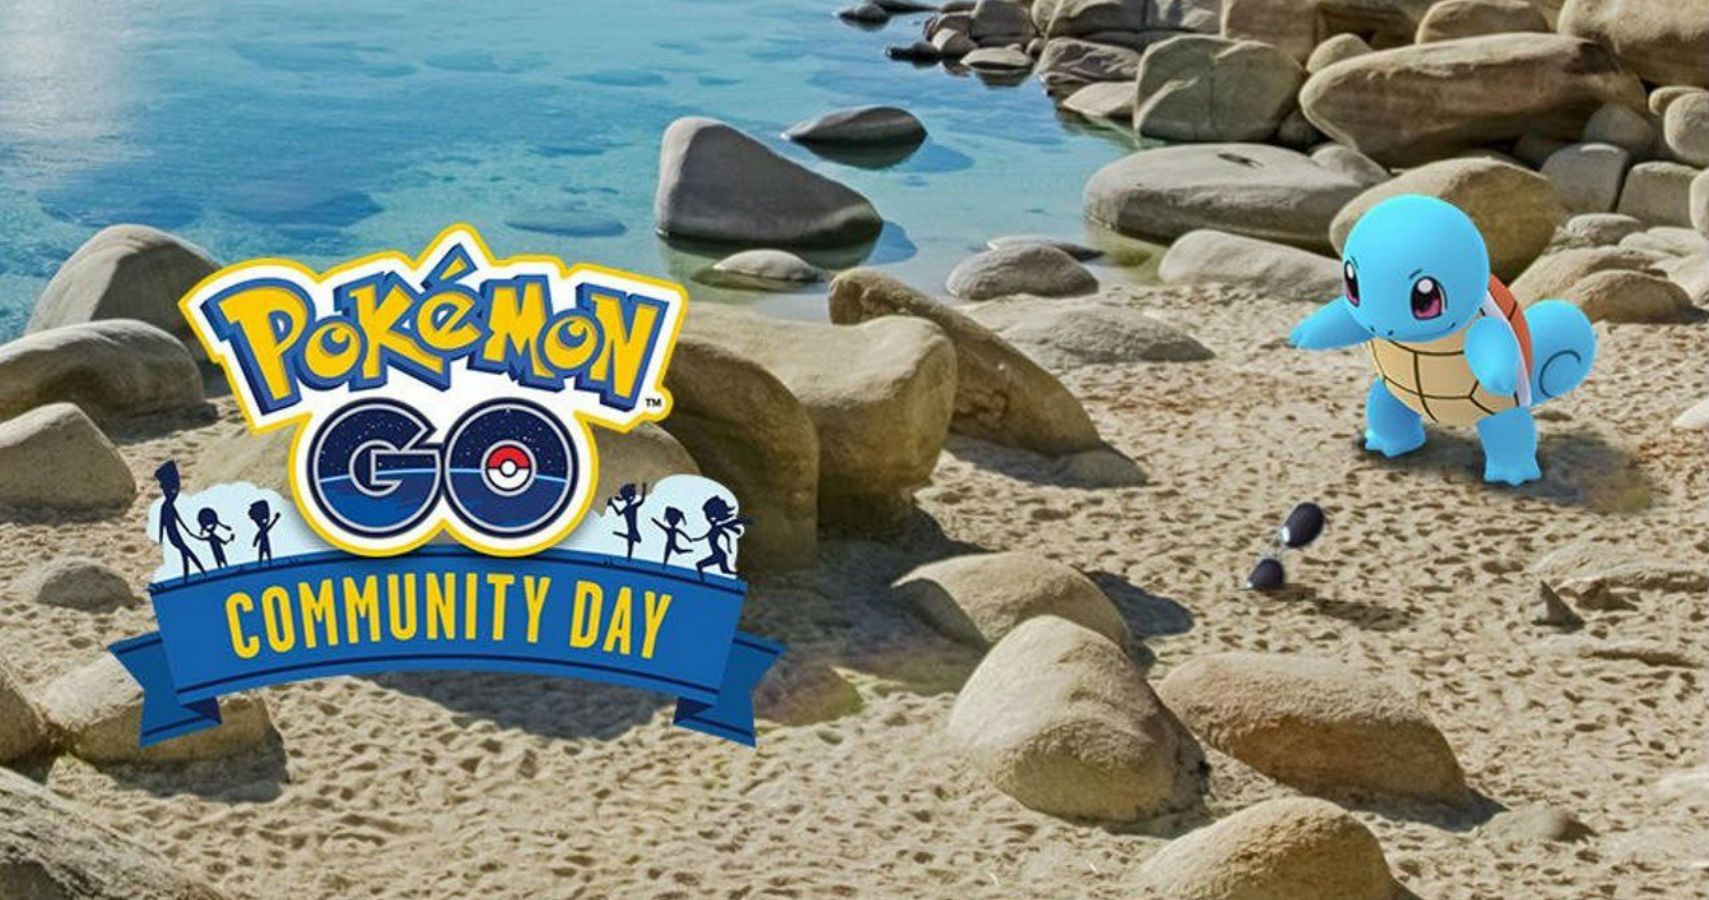 Pokémon GO Players Will Vote For The Next Two Community Days